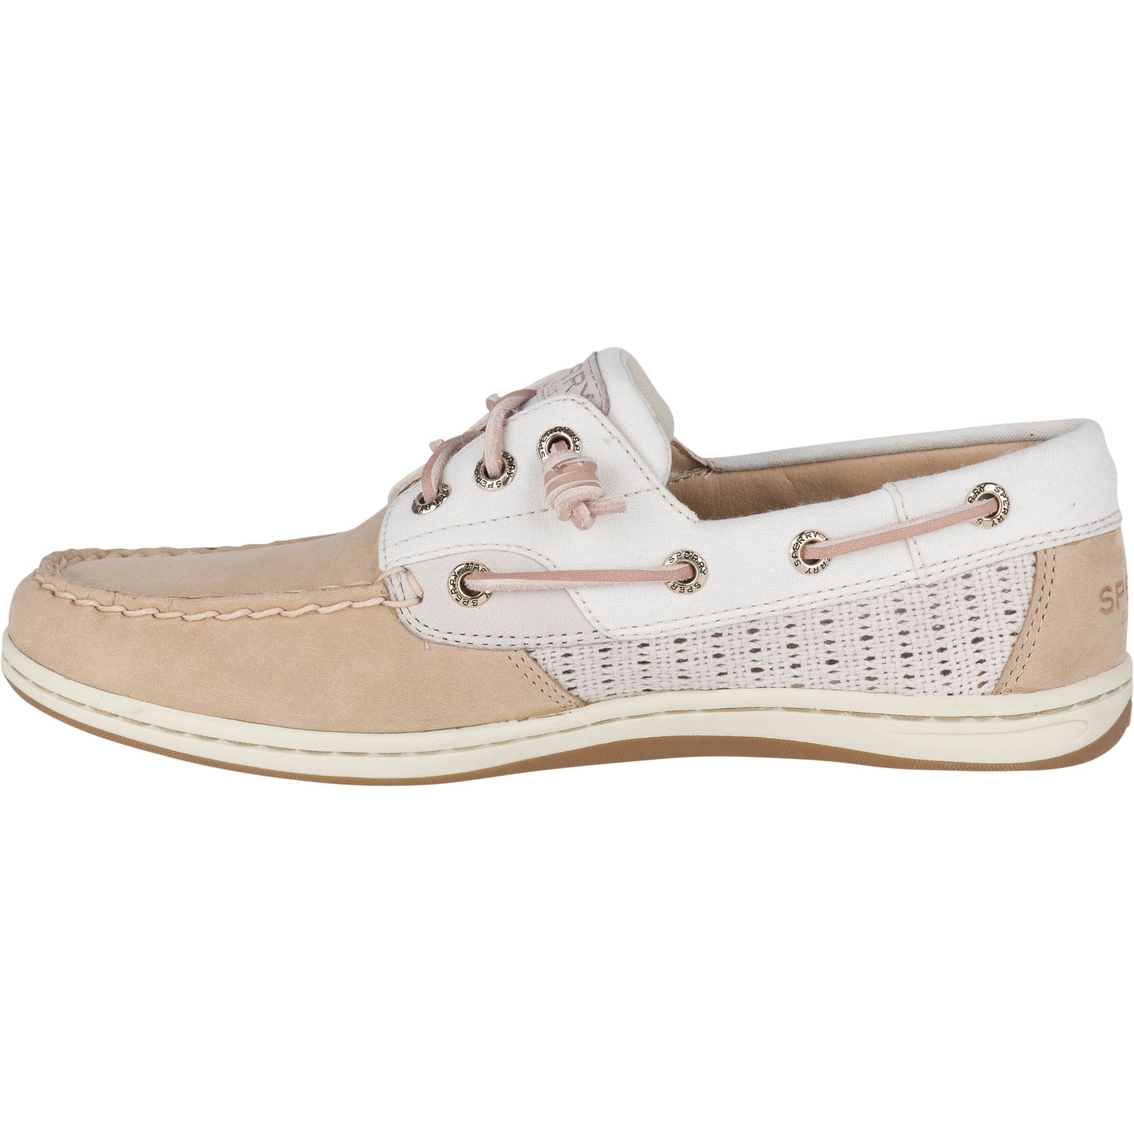 Sperry Women's Songfish Chambray Boat Shoes - Image 2 of 4